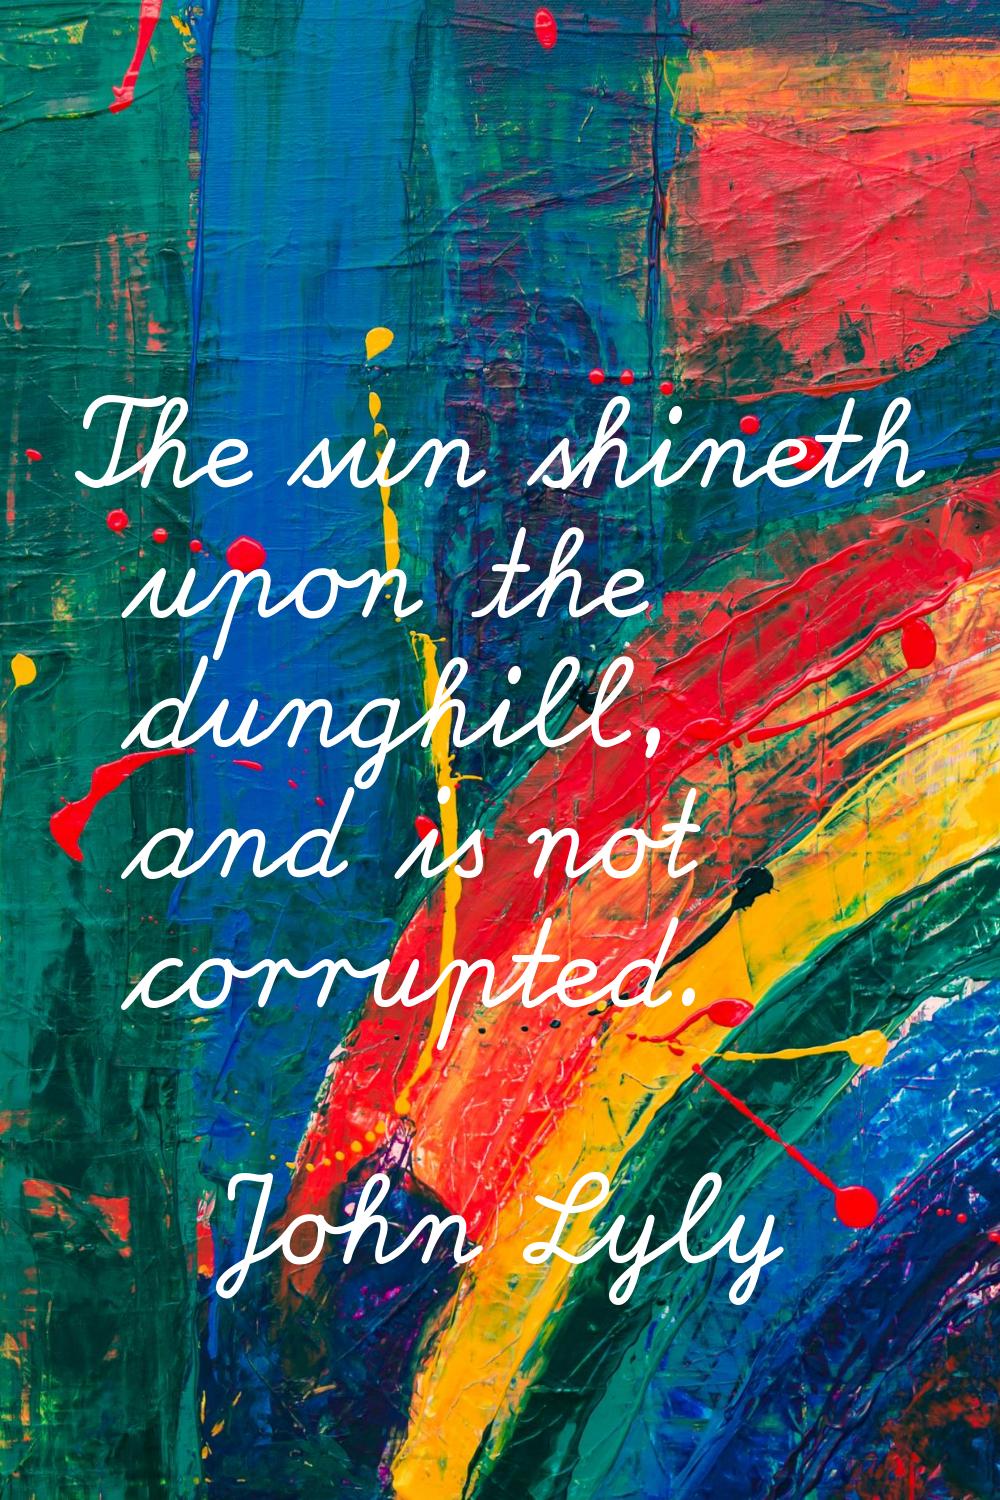 The sun shineth upon the dunghill, and is not corrupted.